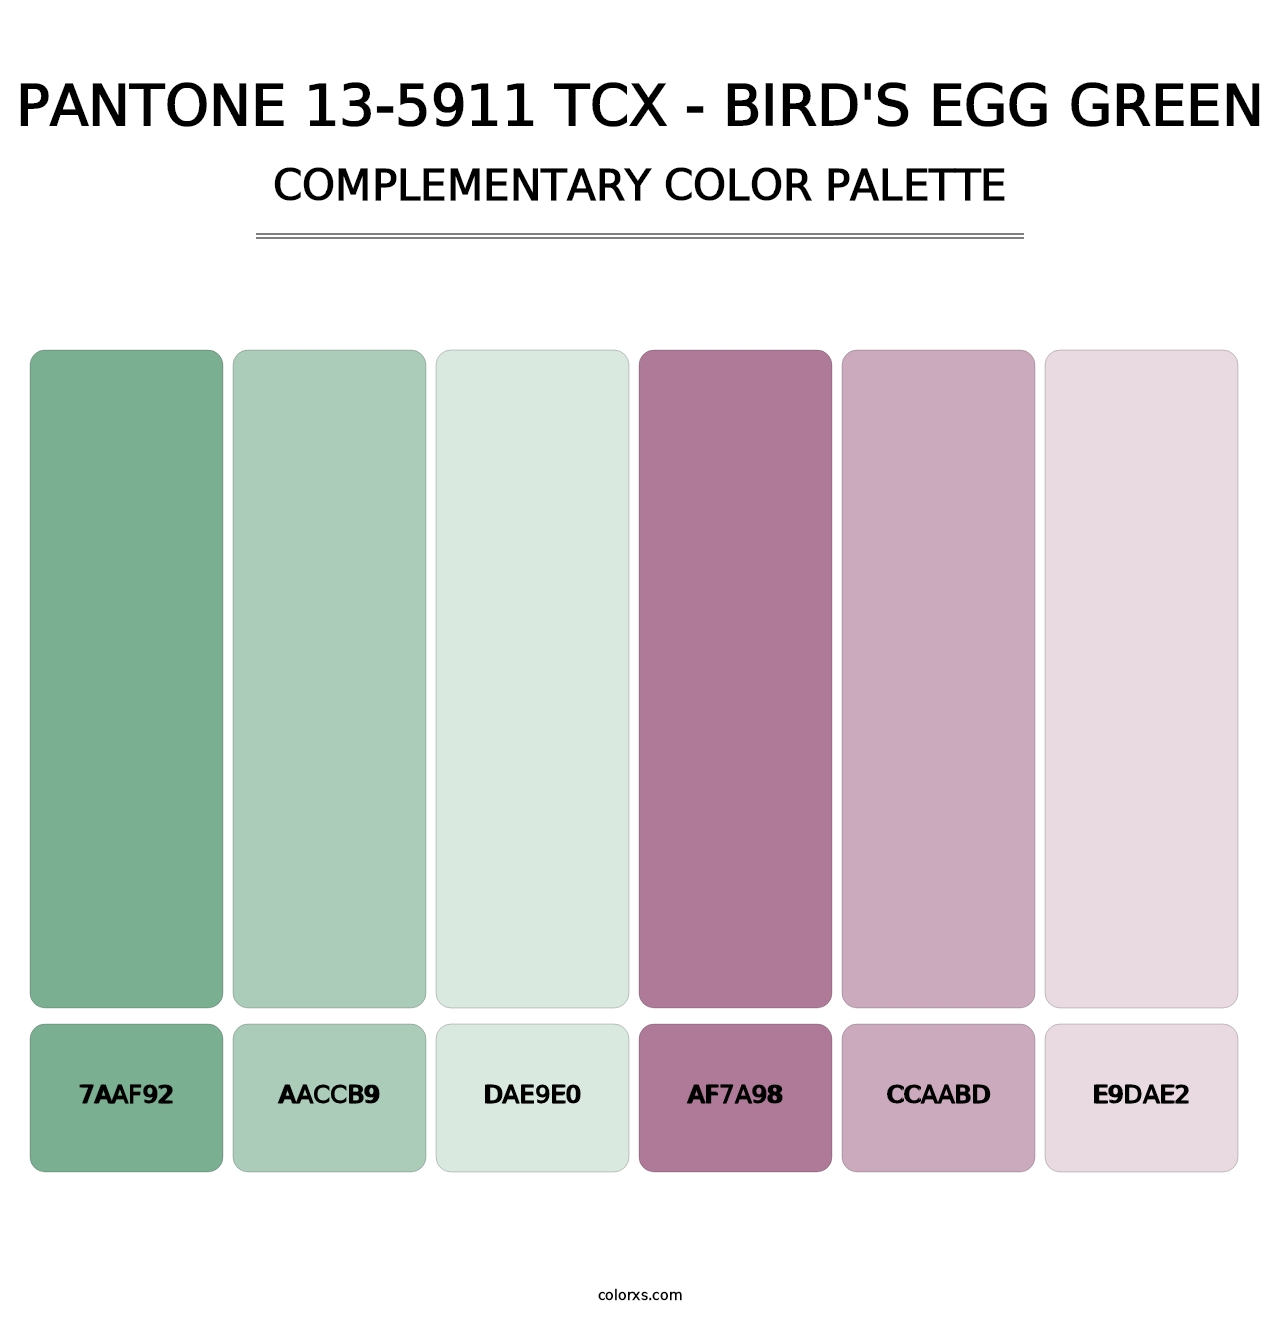 PANTONE 13-5911 TCX - Bird's Egg Green - Complementary Color Palette